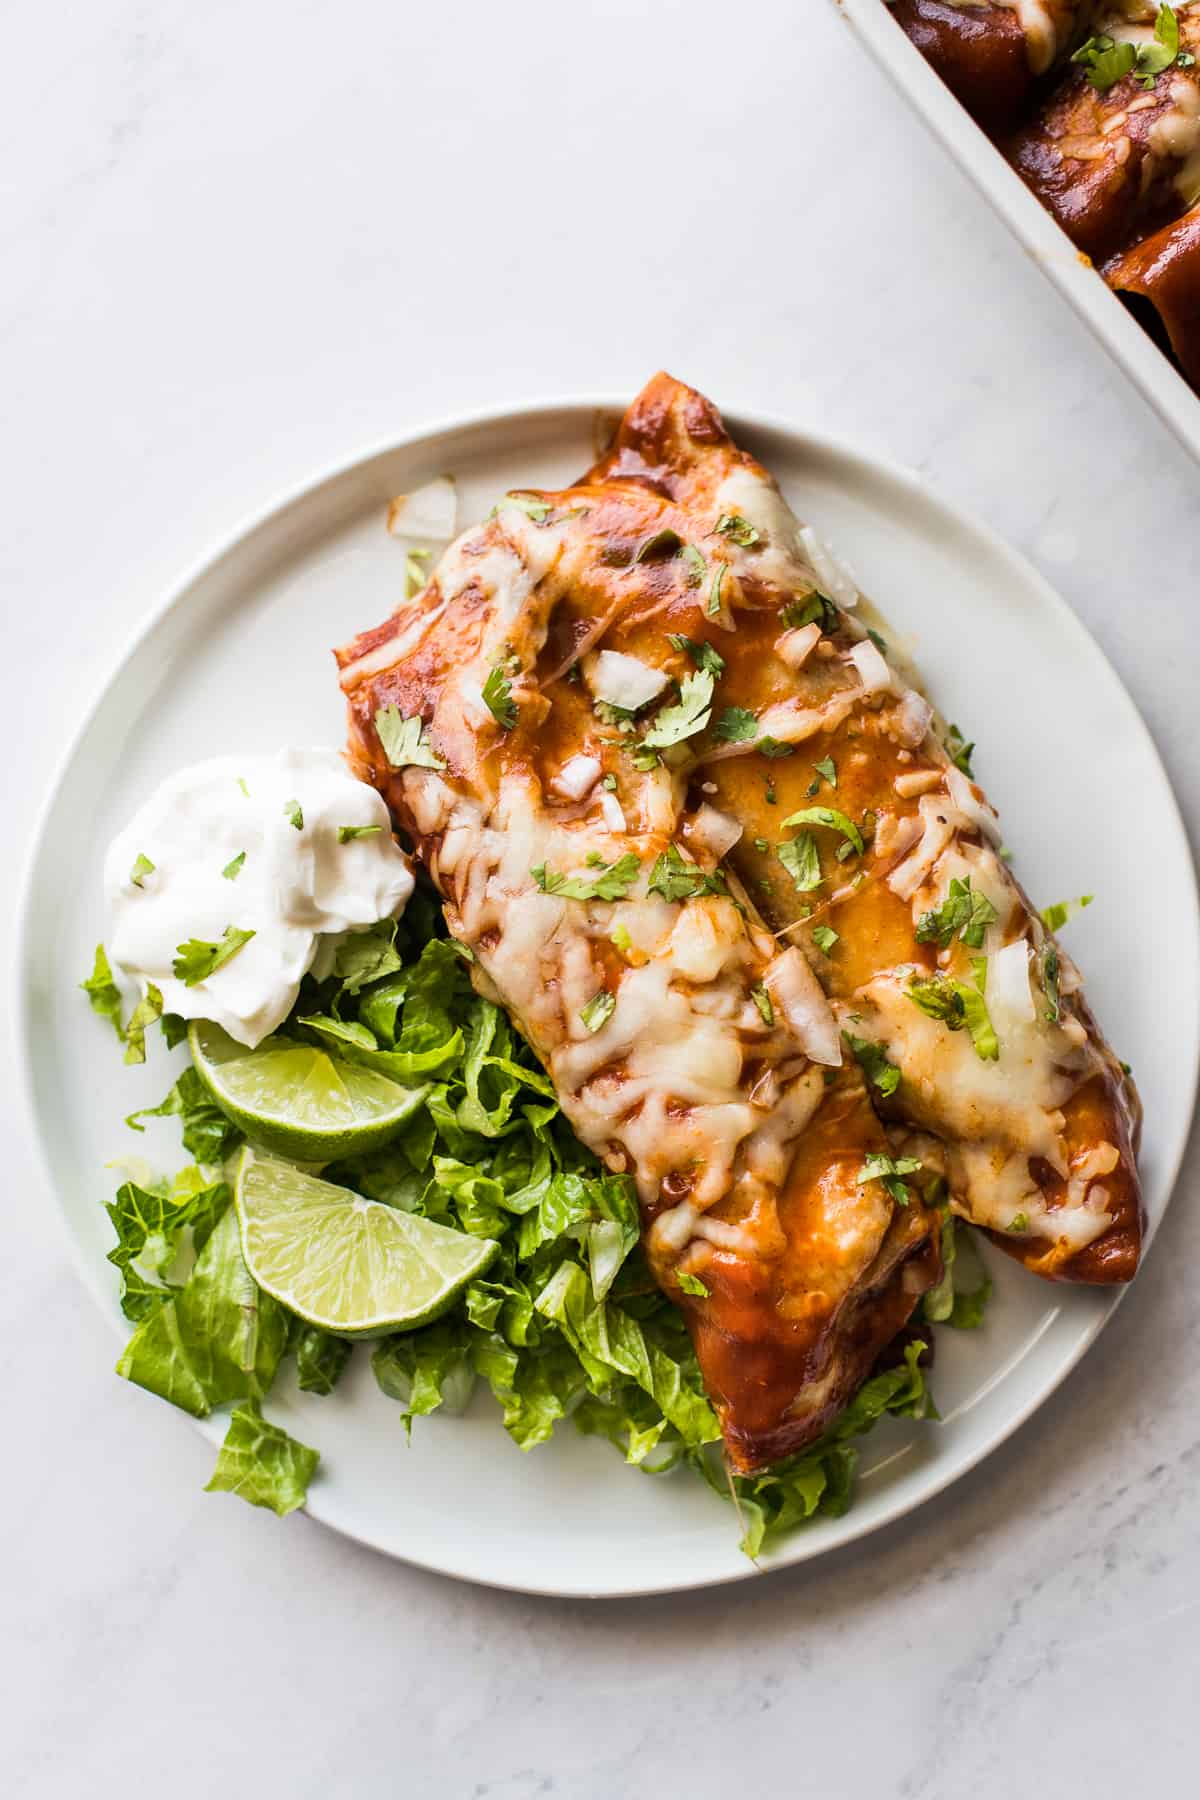 Two turkey enchiladas on a plate with limes, lettuce, and sour cream